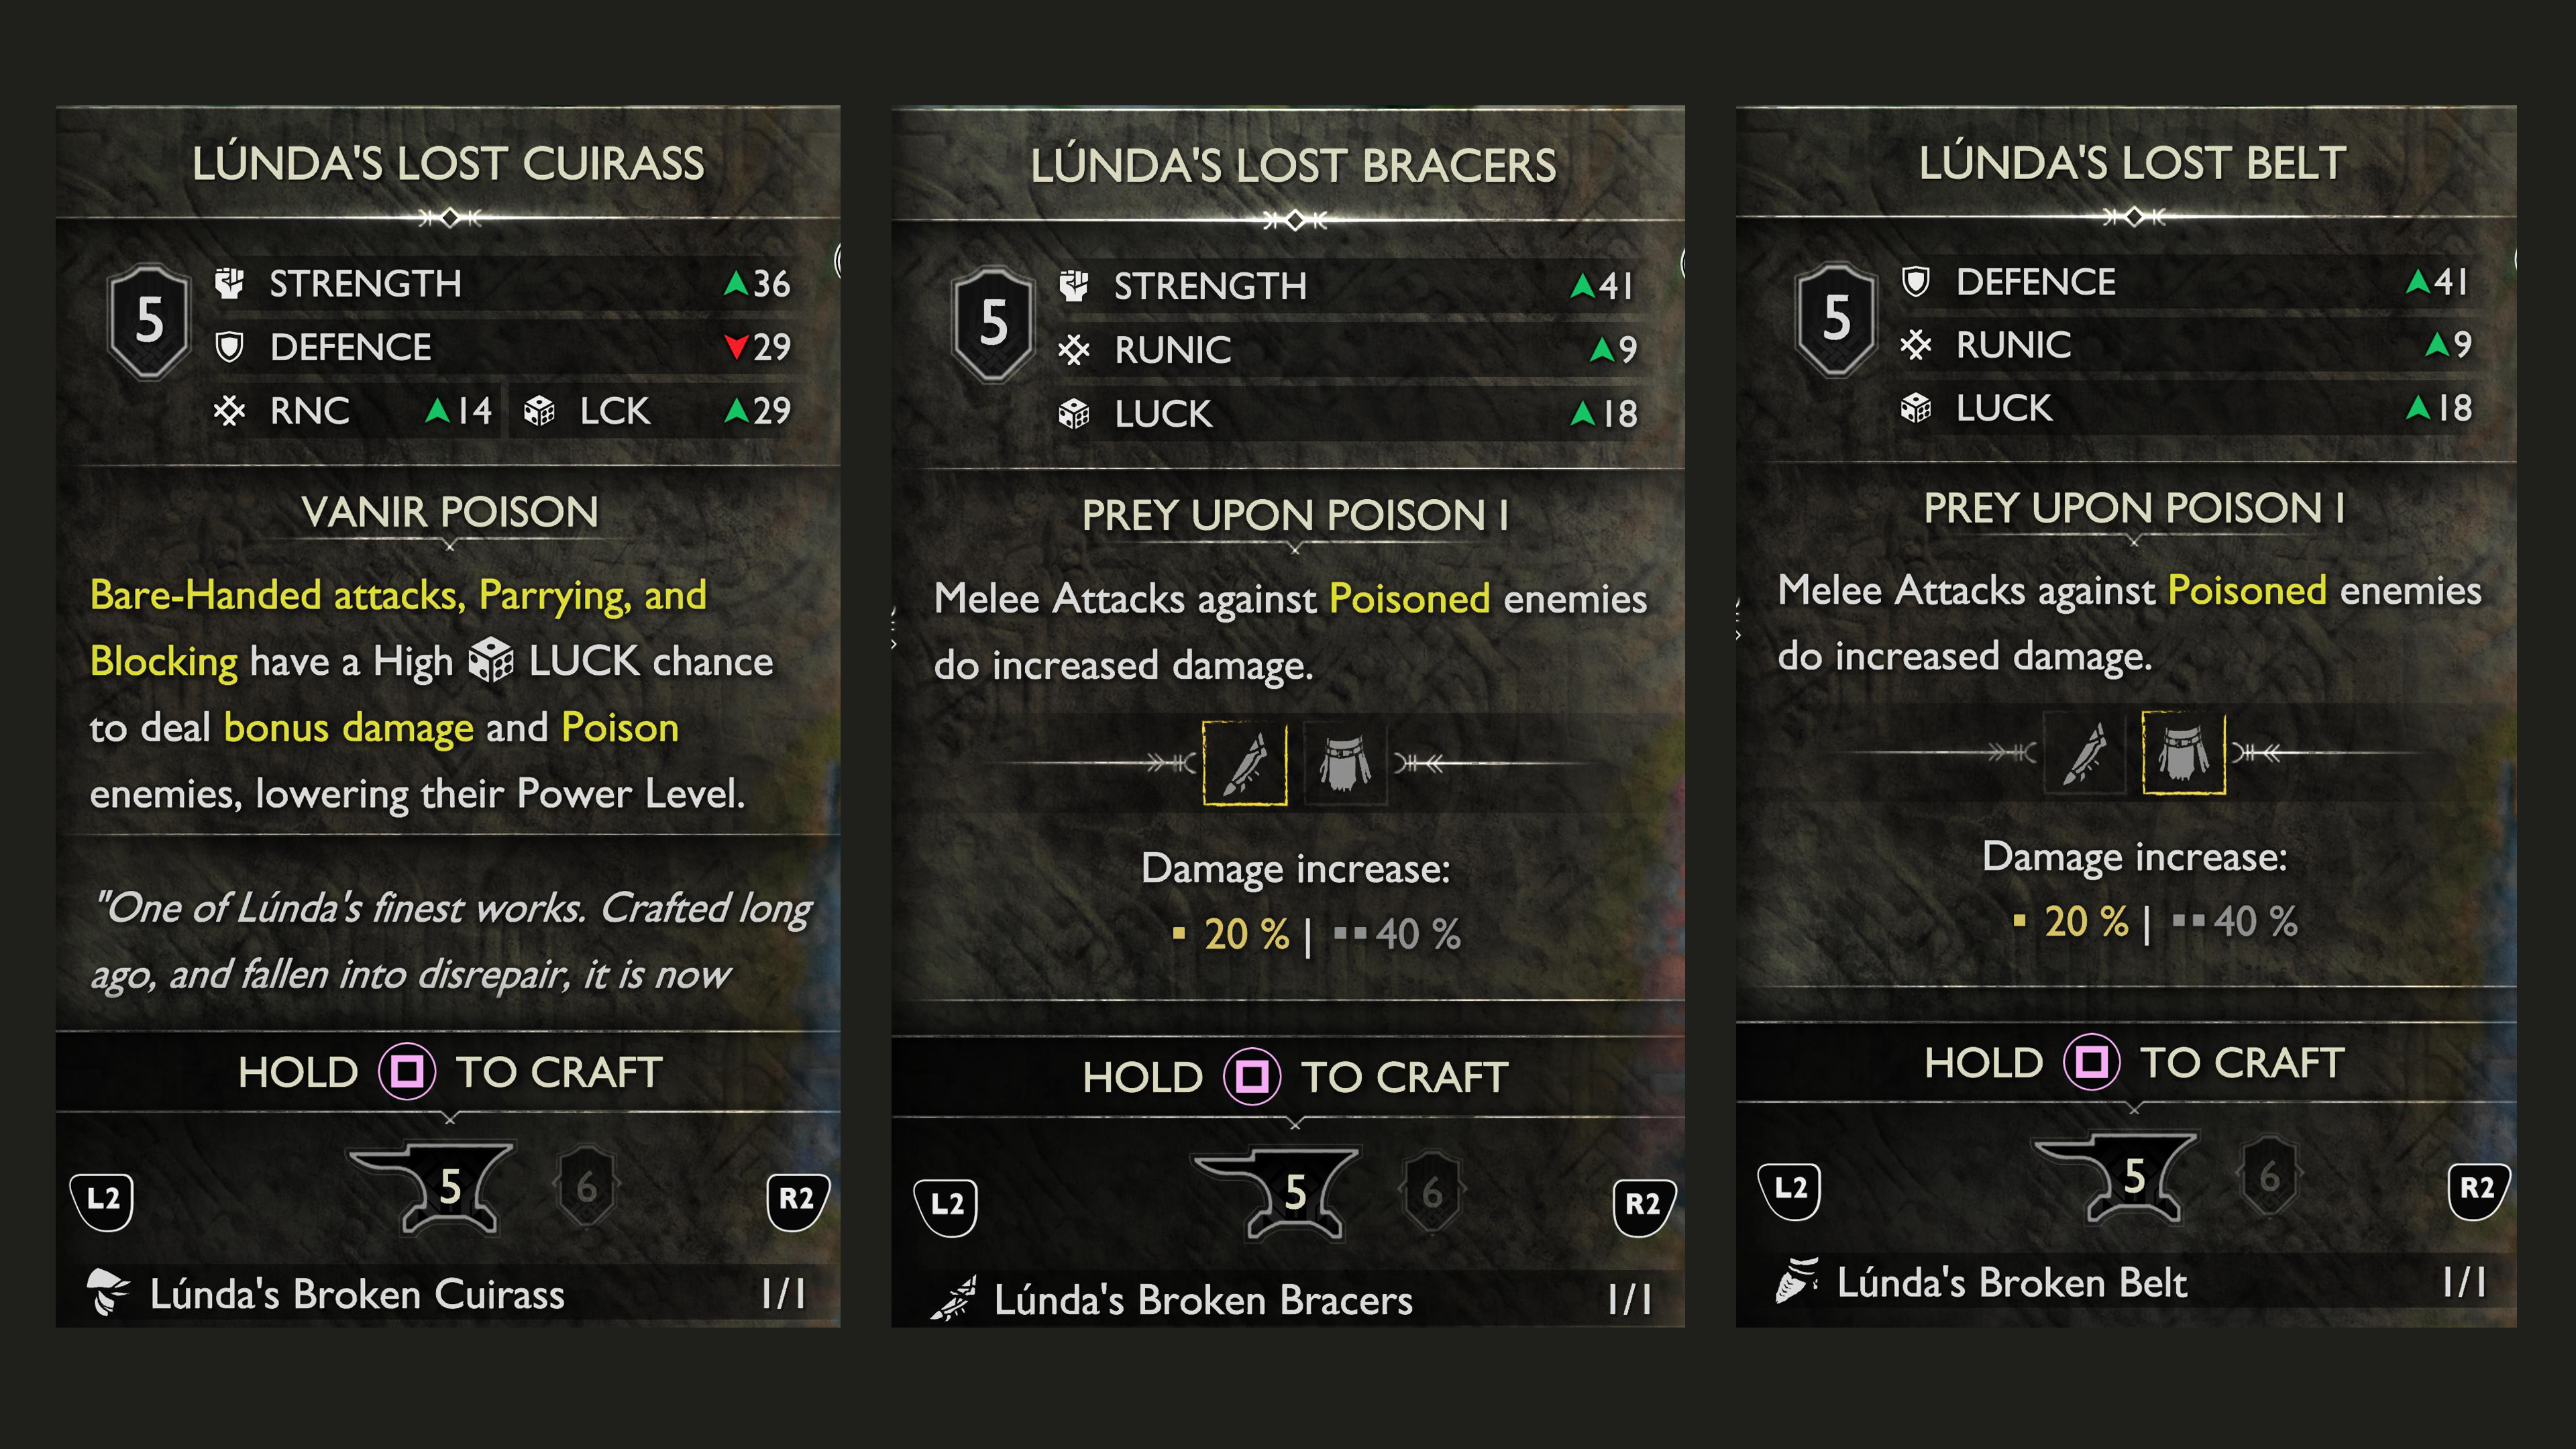 If you complete the optional task from Lunda, she’ll craft the above armor for you.